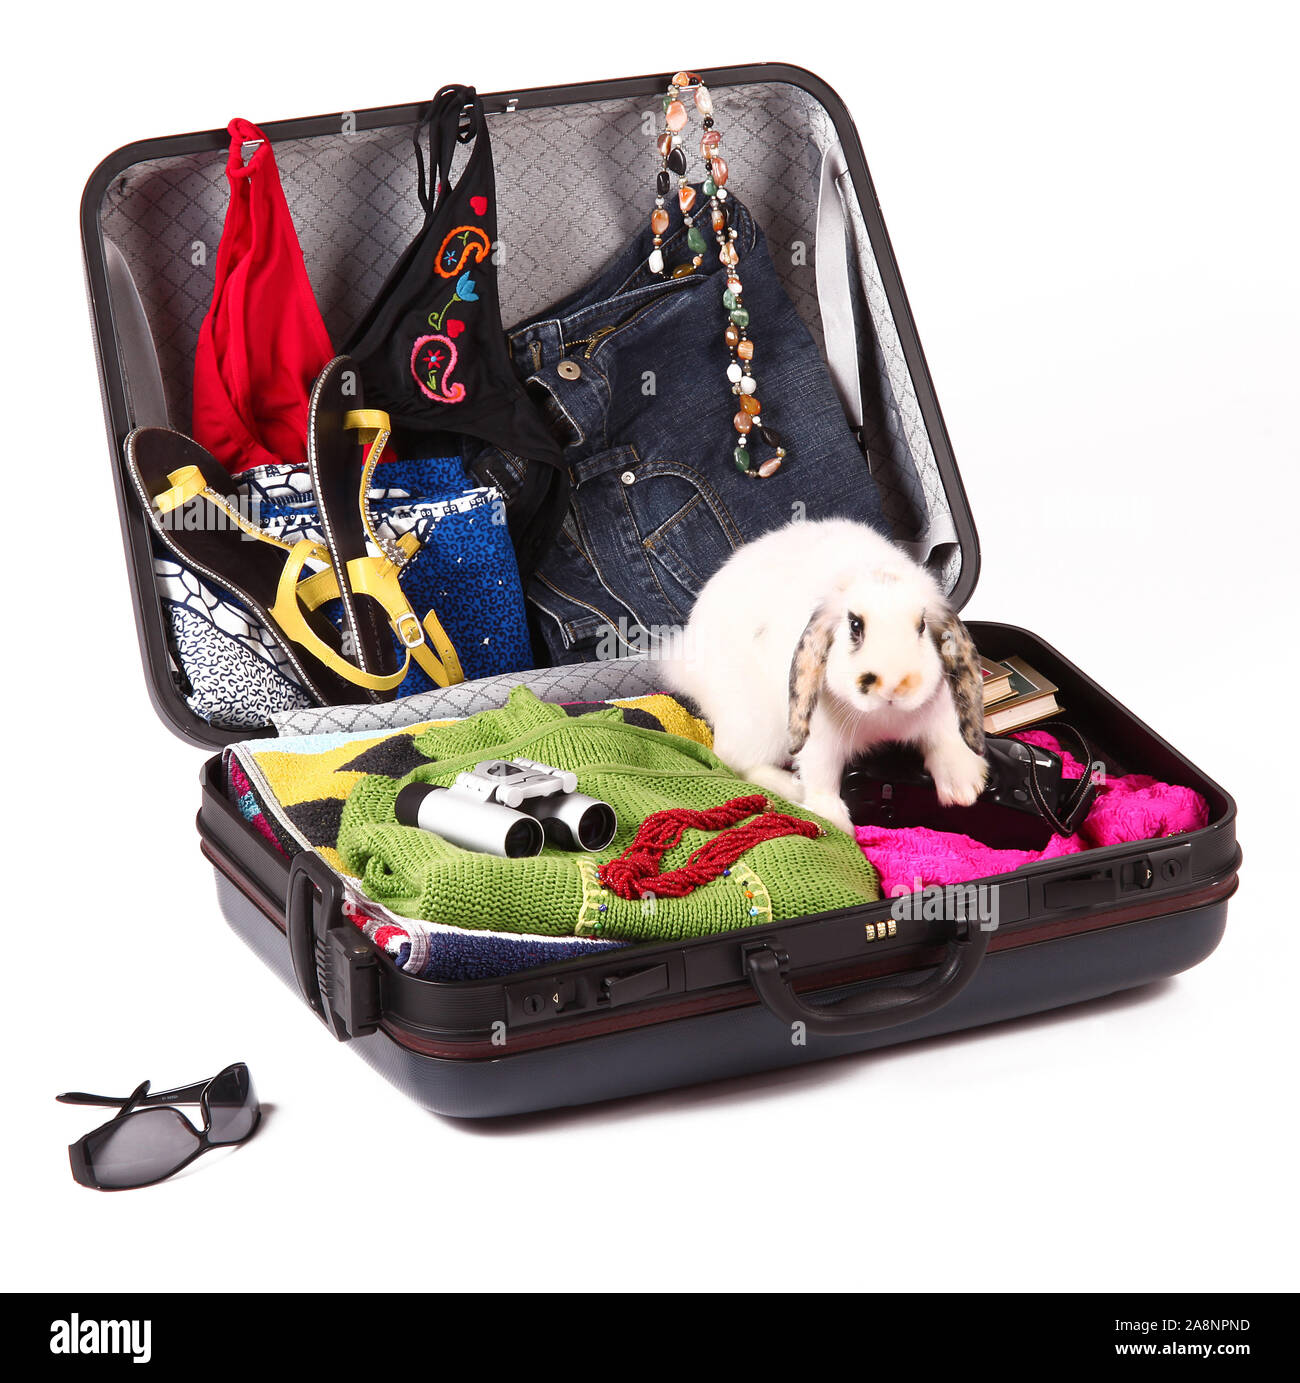 modern suitcase full of dress and objects on white background Stock Photo